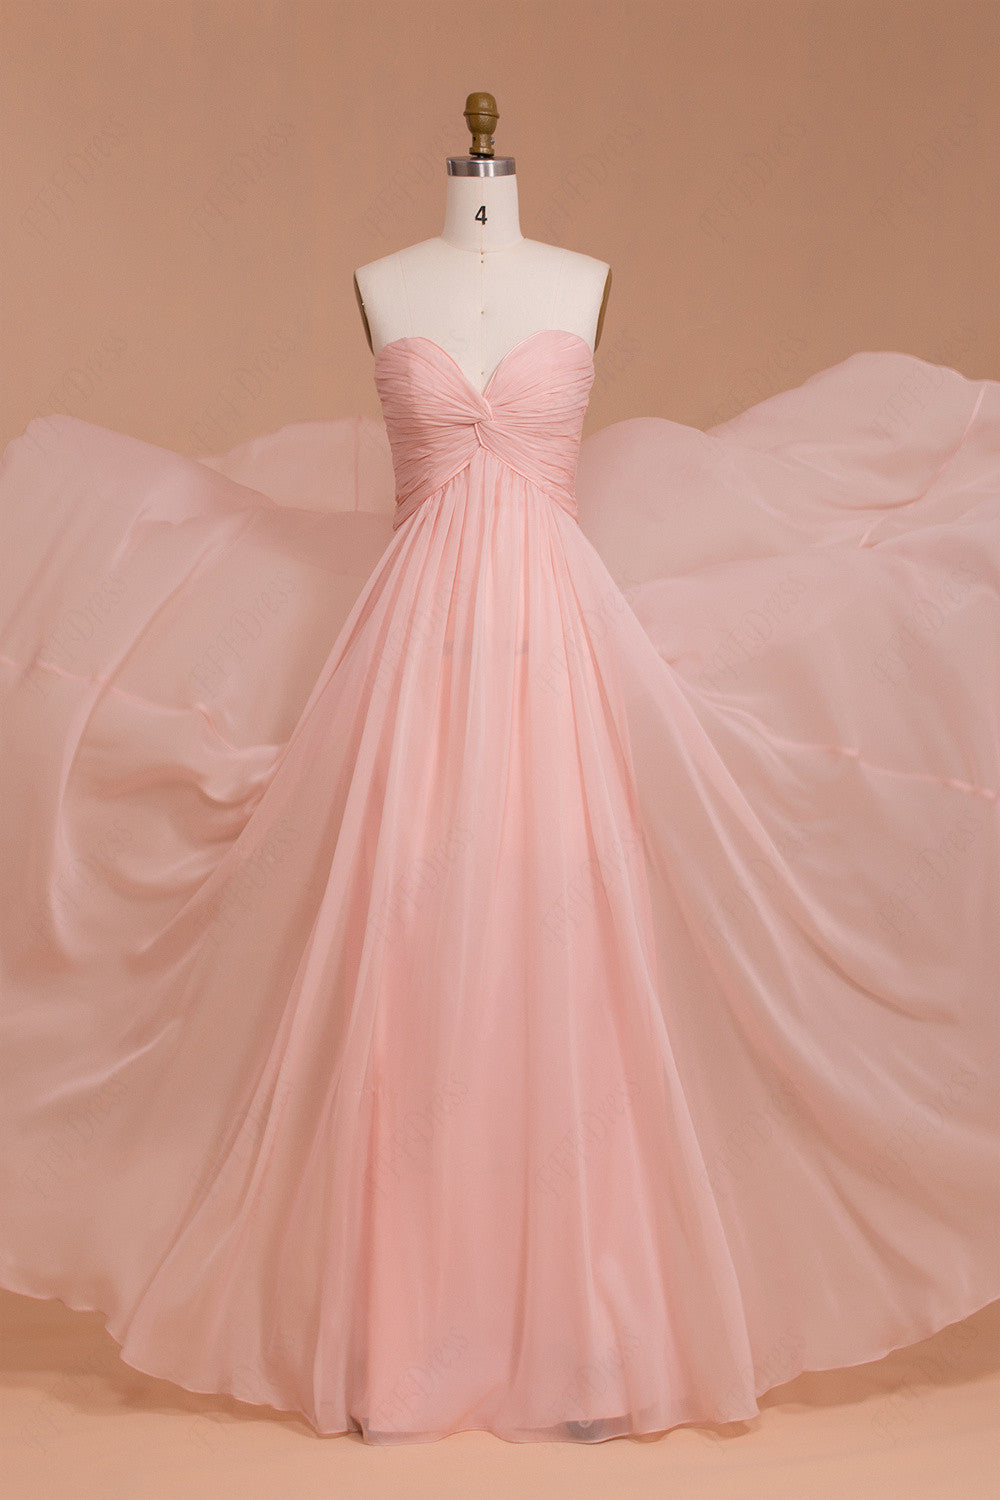 Sweetheart Pink Maternity bridesmaid dresses for pregnant